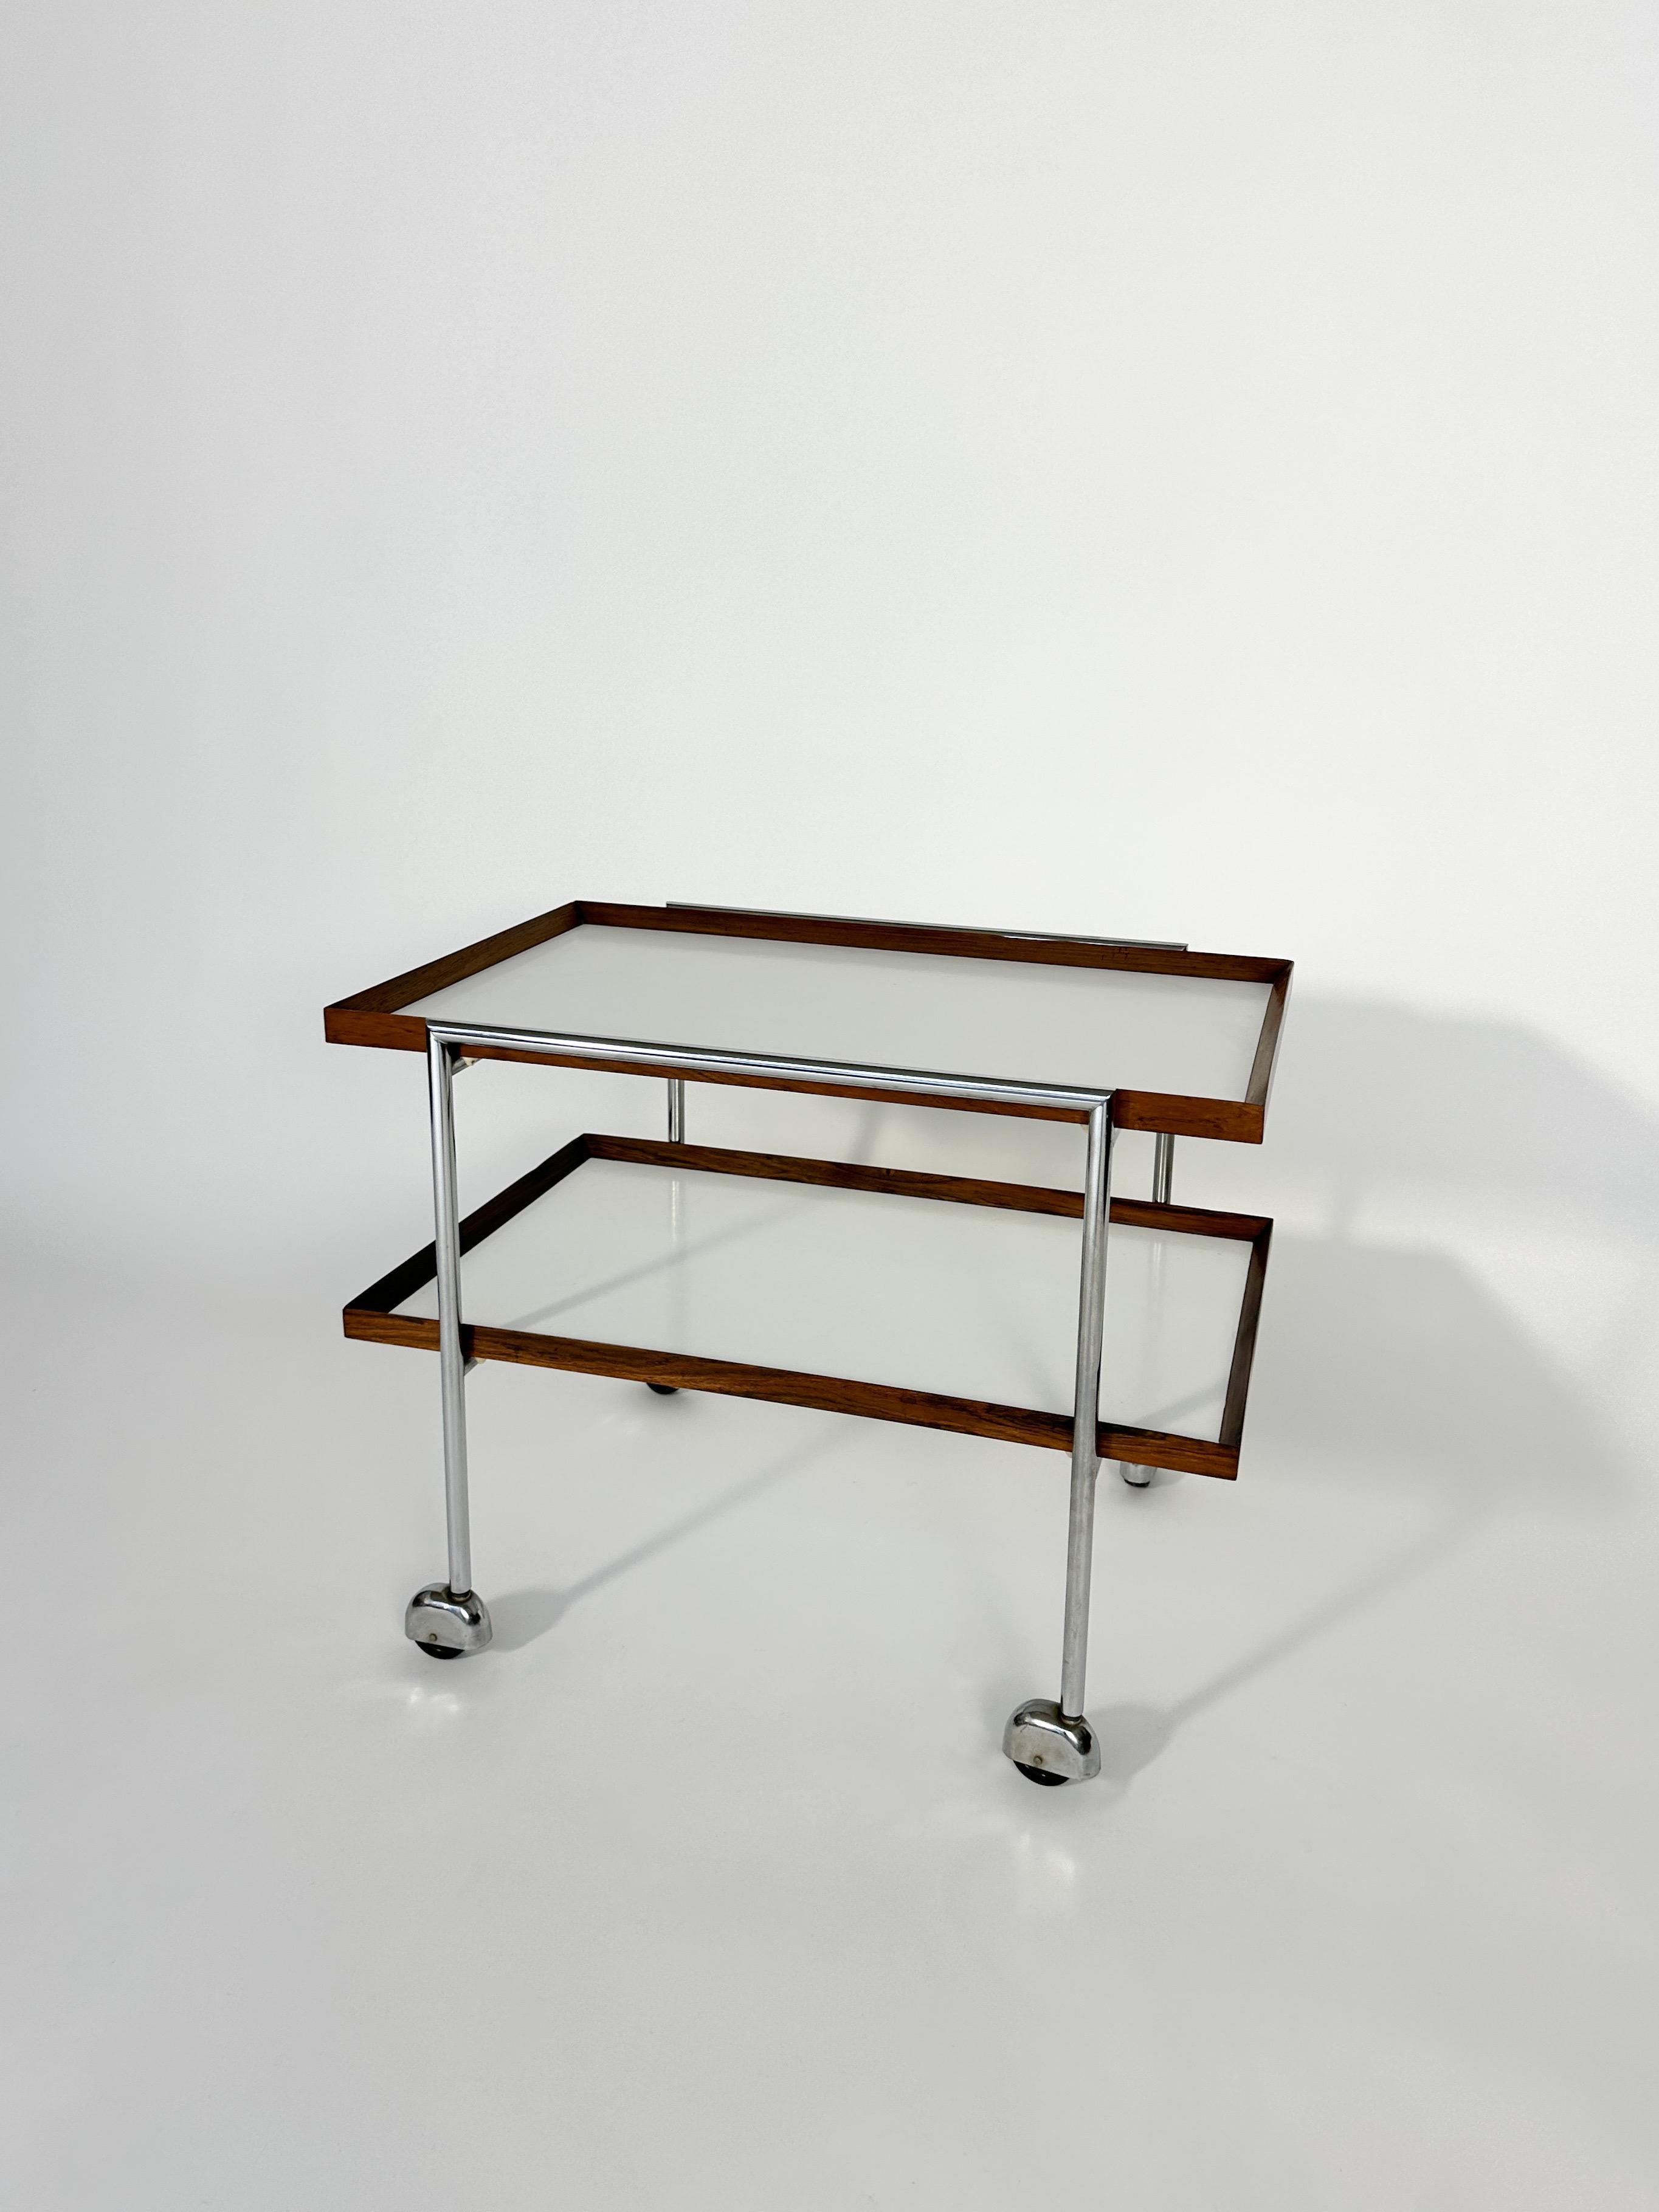 Hand-Crafted Poul Norreklit Bar Car Rosewood and Chrome Steel E Pedersen & Son Denmark 1960s